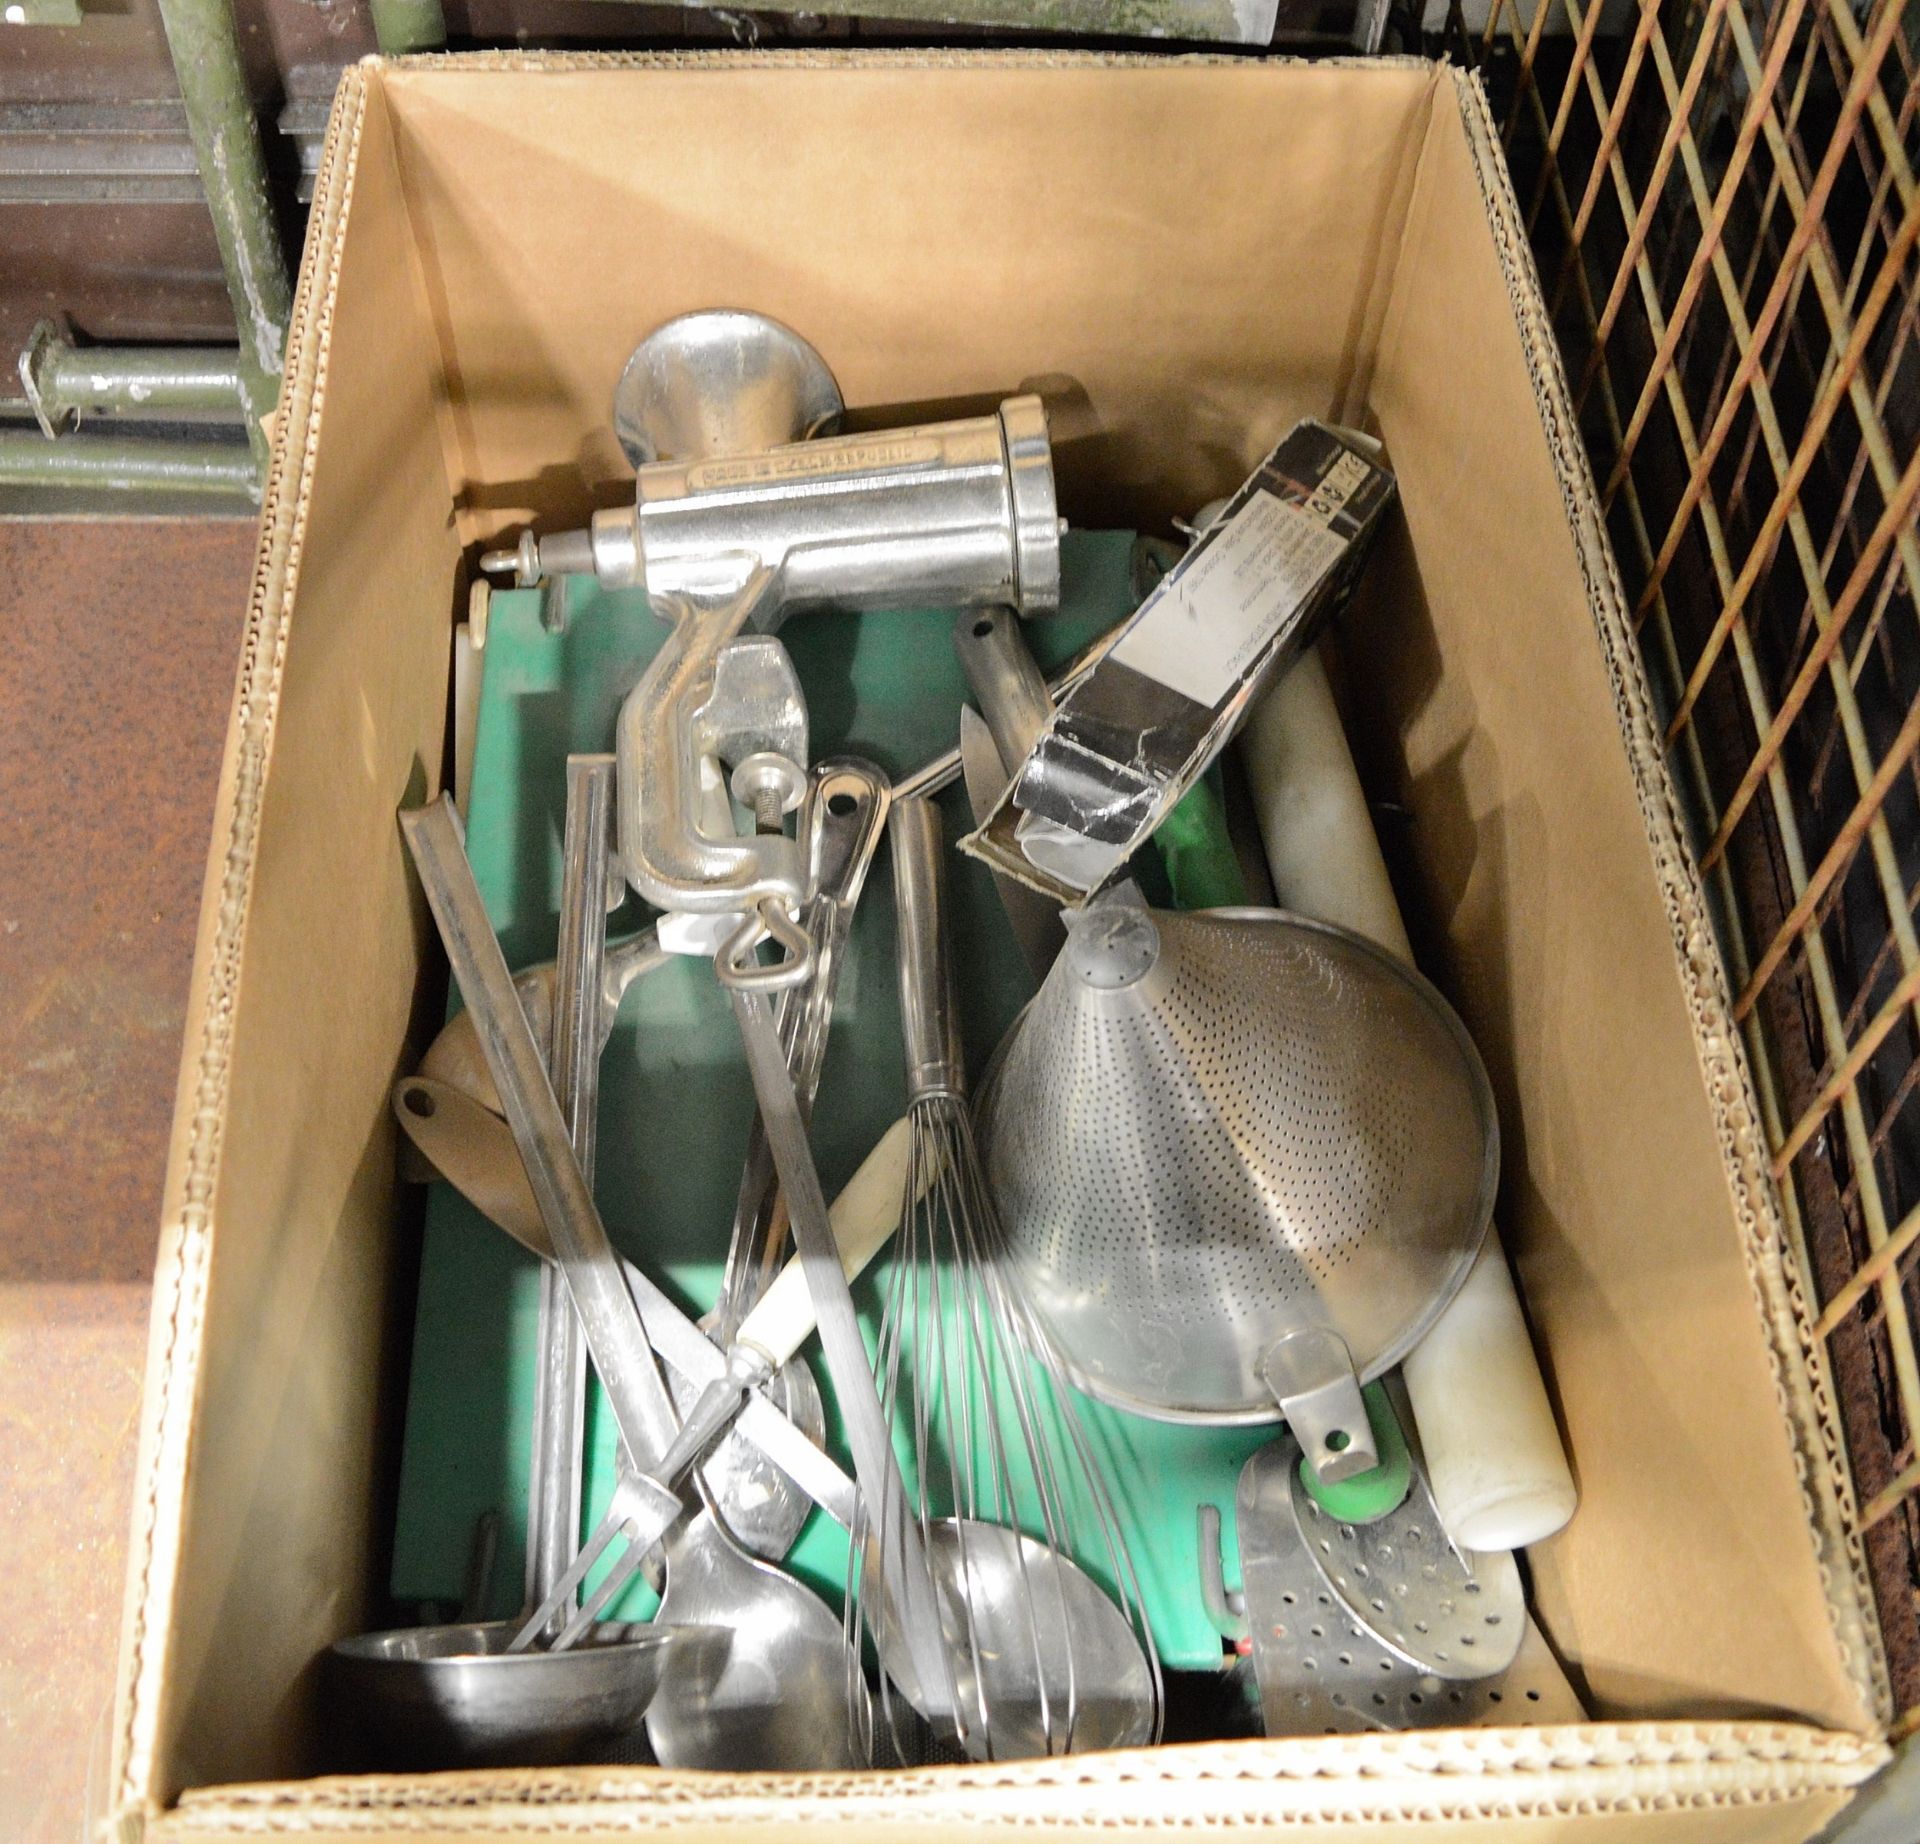 Field Kitchen set - cooker, oven, utensil set in carry box, norweigen food boxes, accessor - Image 4 of 4